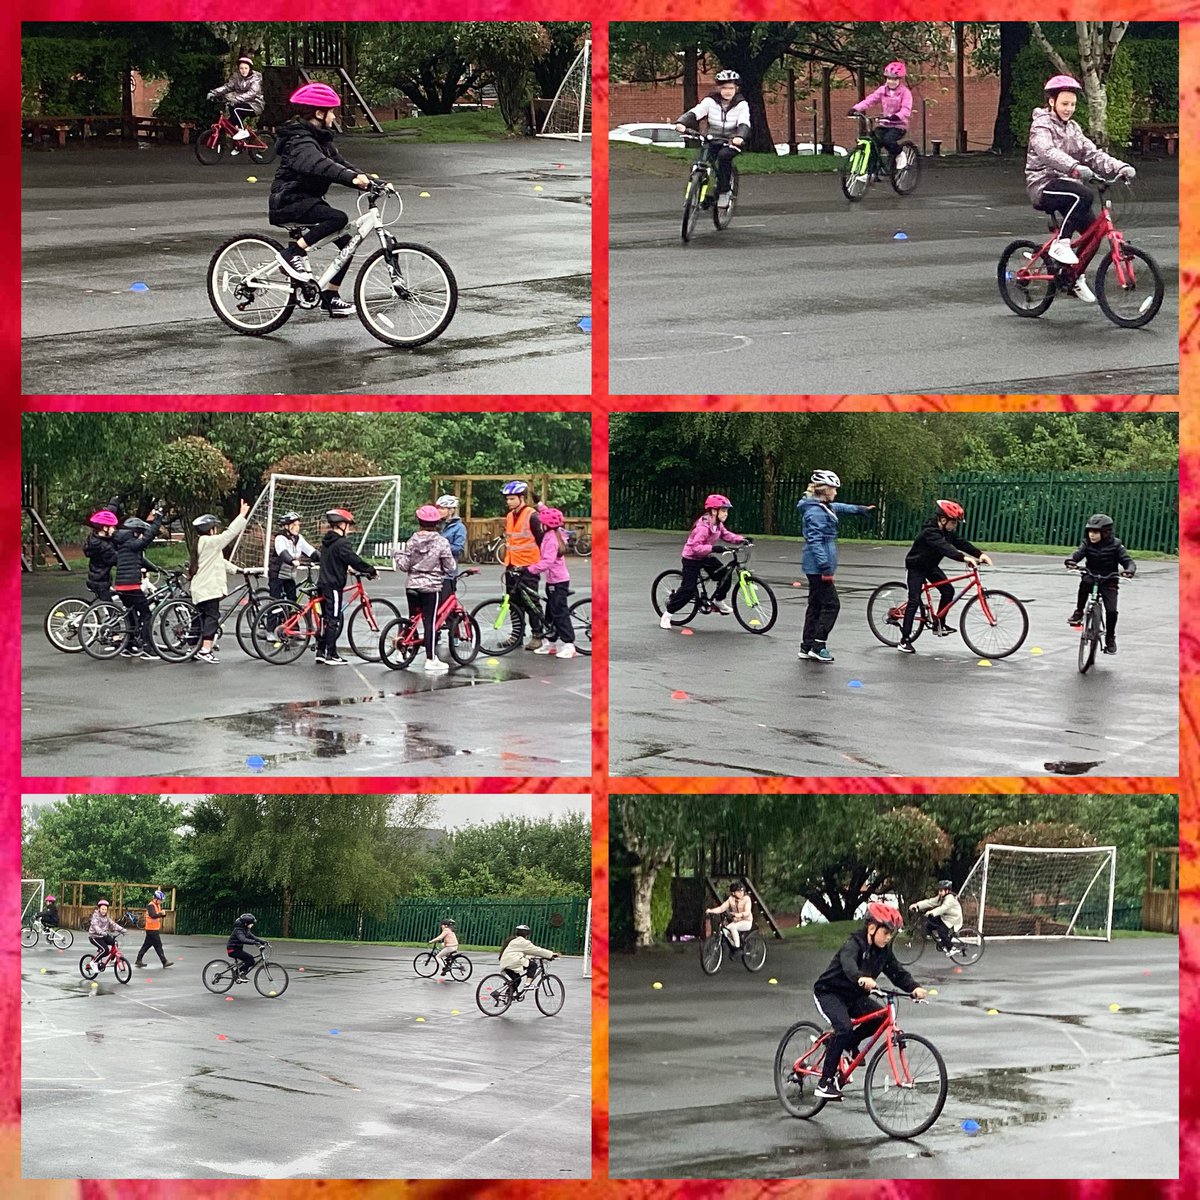 Year 6 have completed their level 1 and level 2 qualification in Bikeability, this week. Even through the rain and colder temperatures, they persevered cycling along the main roads and alongside the traffic. 🚲🚲🚲

@BikeabilityUK